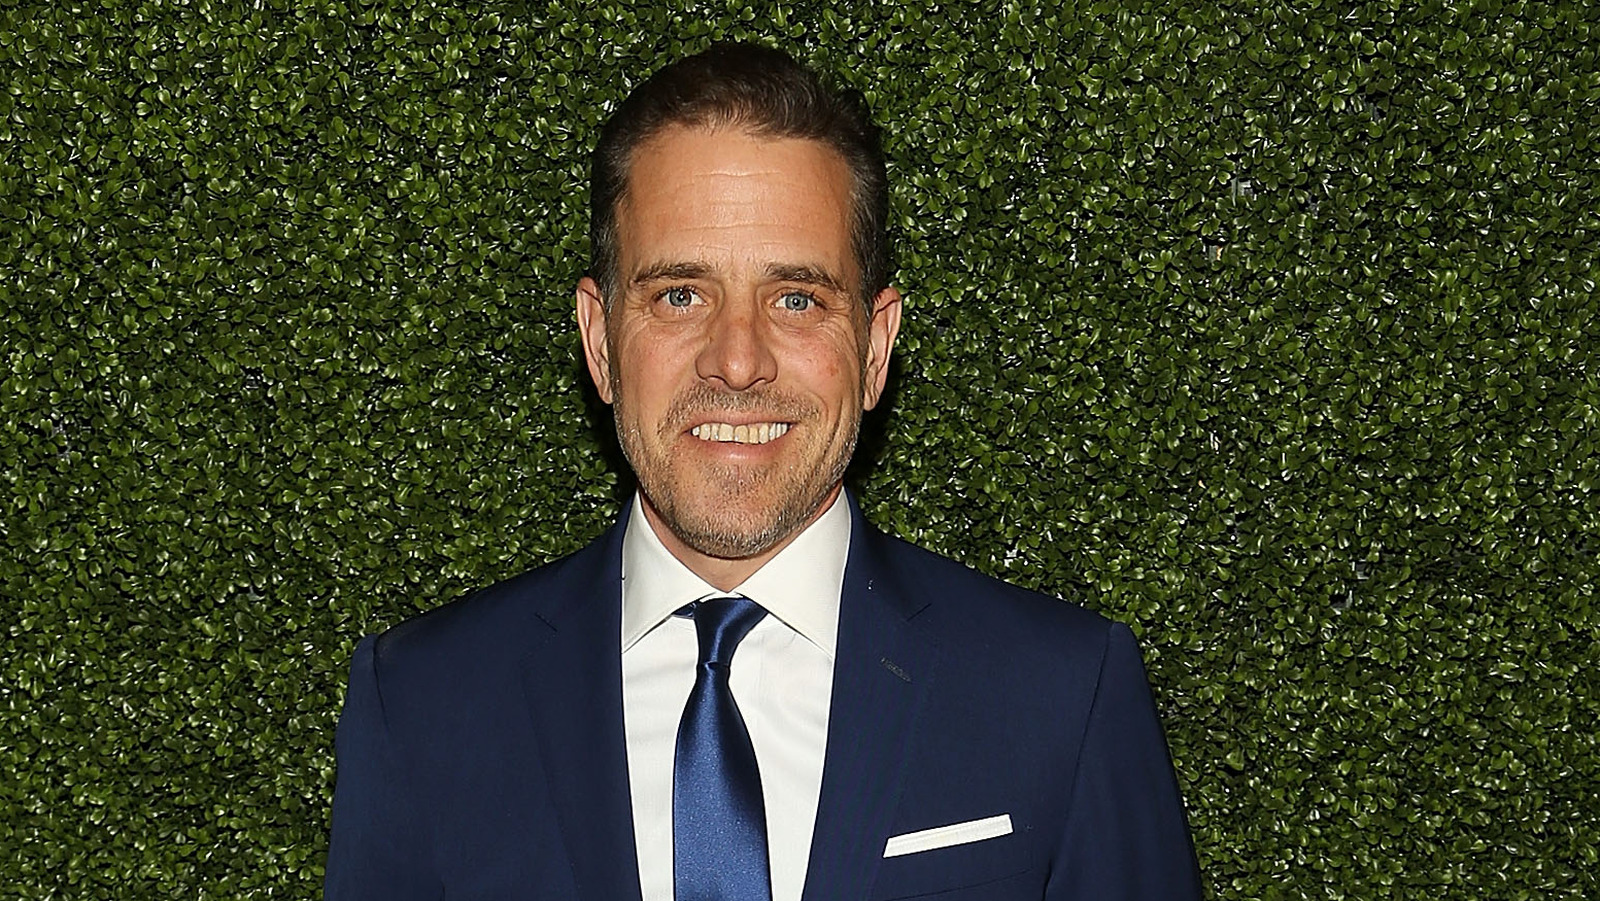 hunter biden and his wife melissa cohen live extremely lavish lives